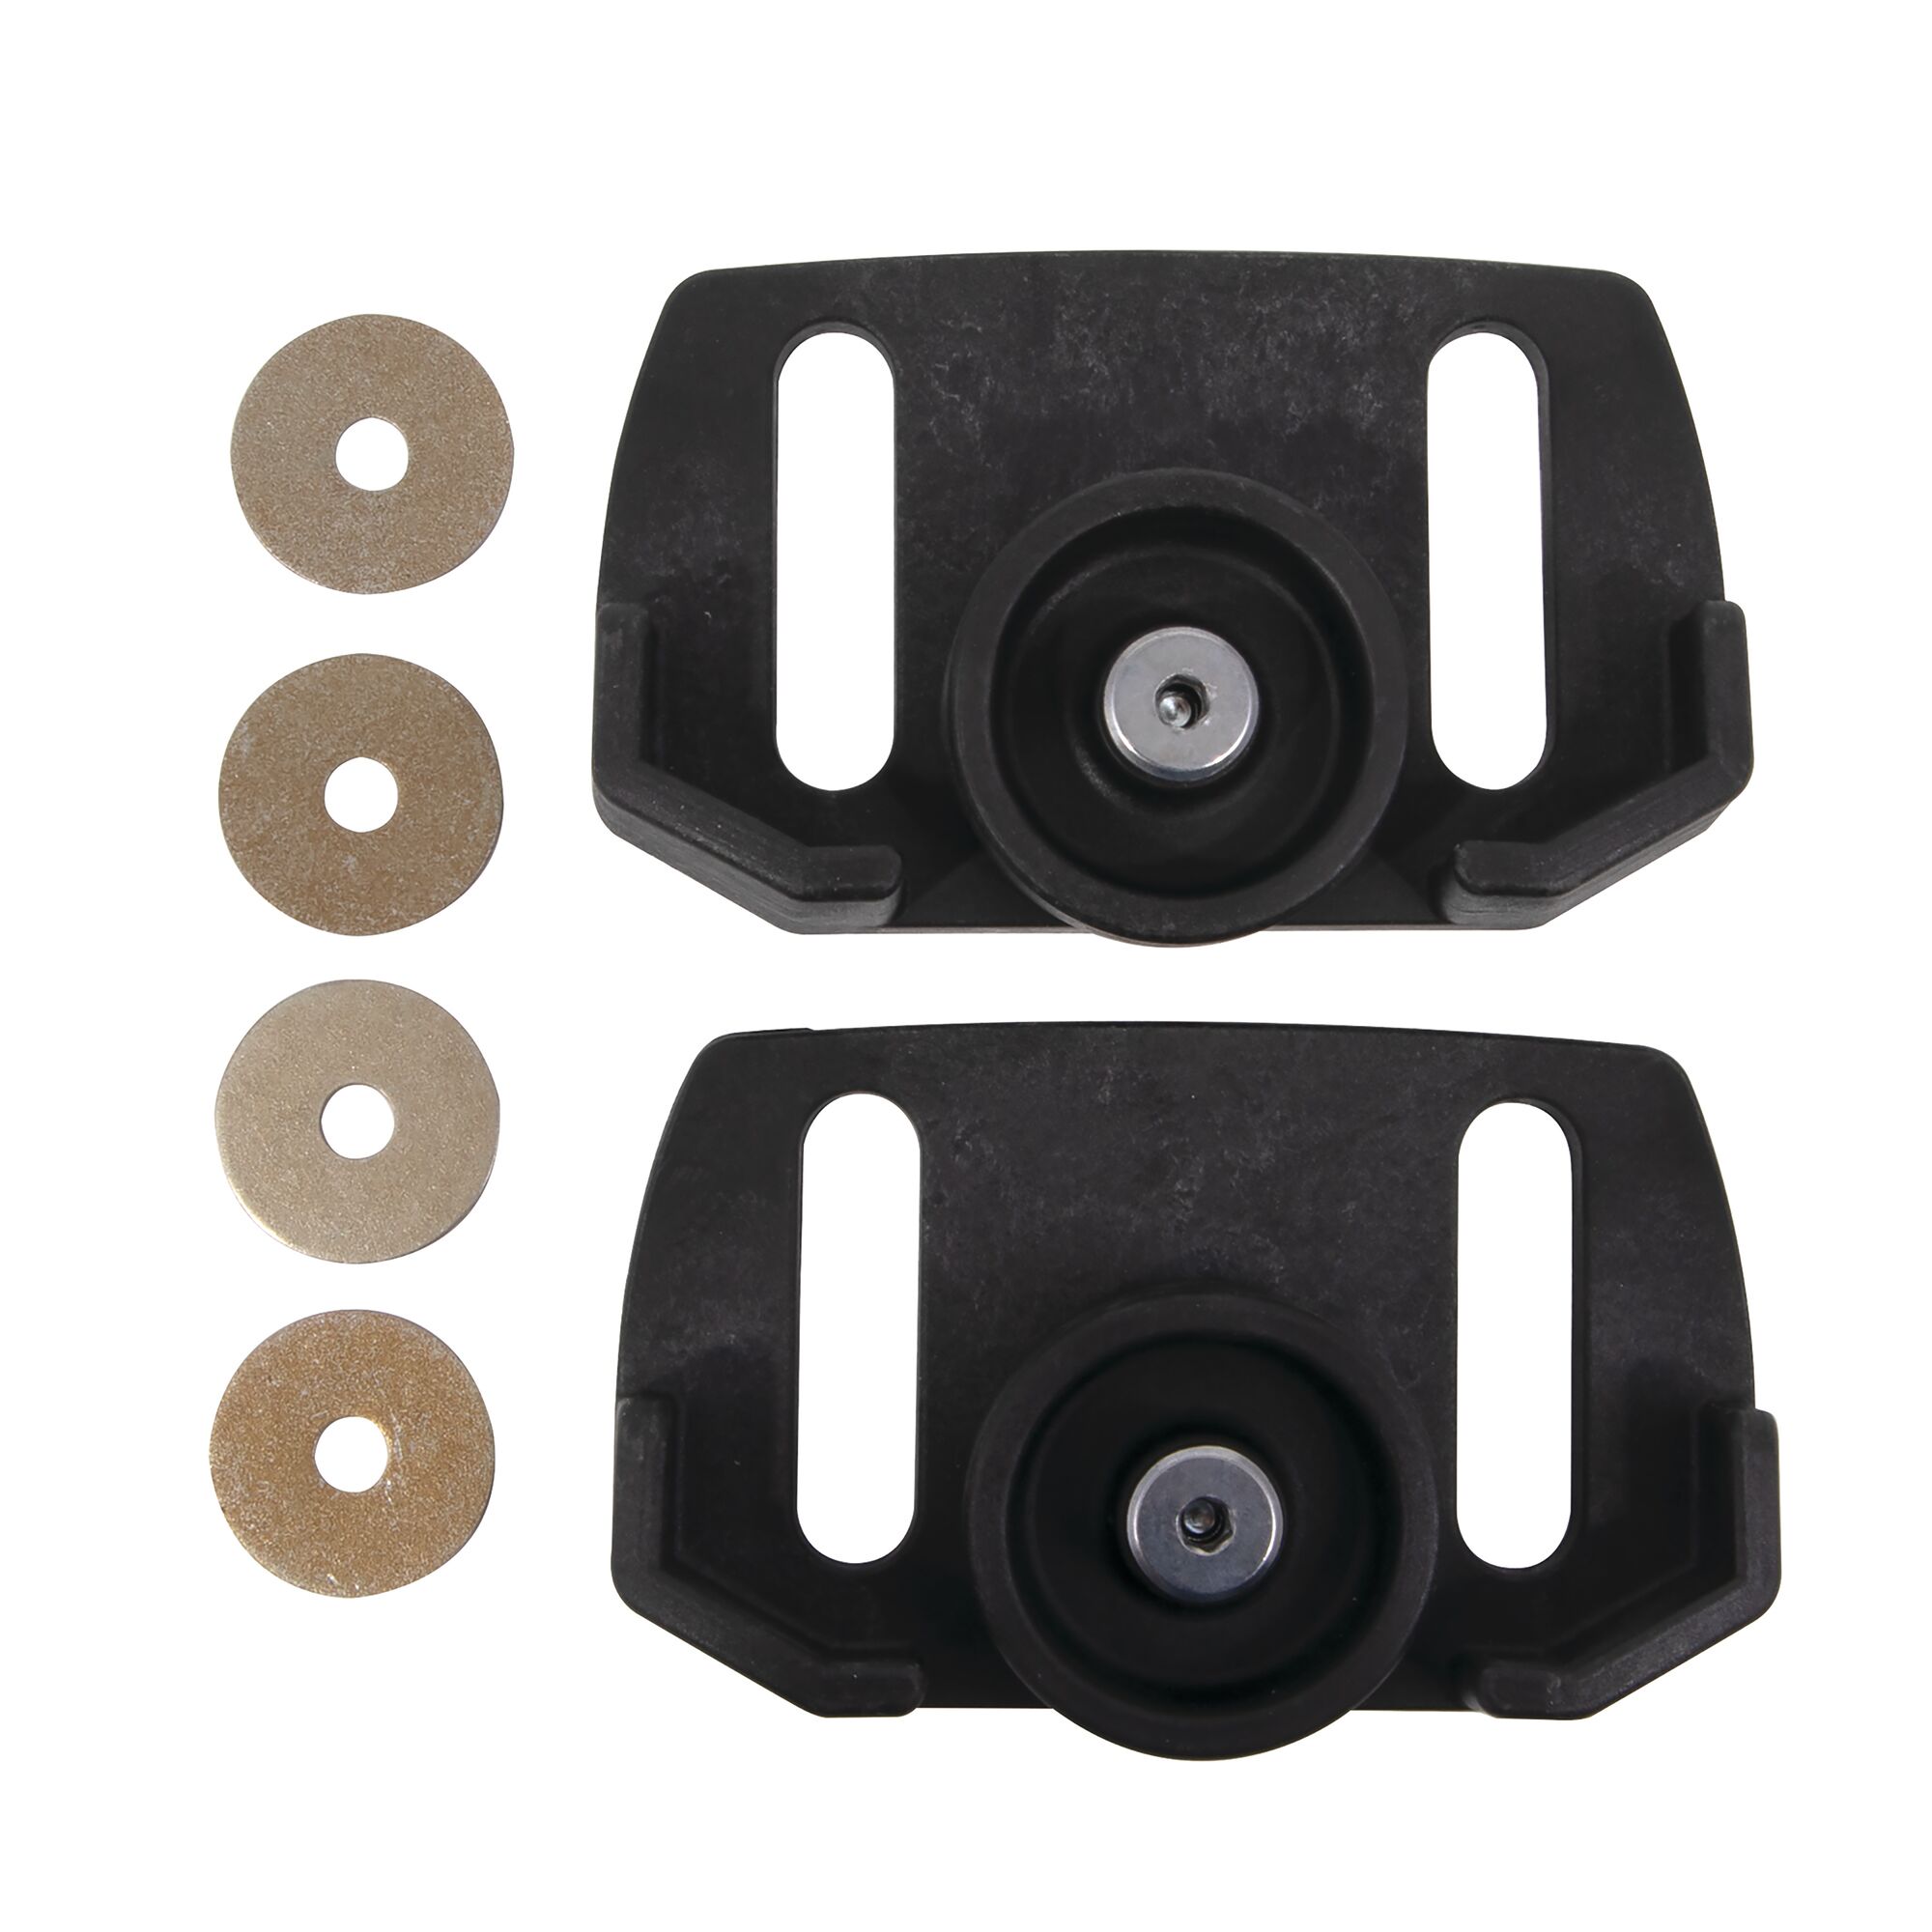 Non abrasive rolling skid shoes 1 pair.